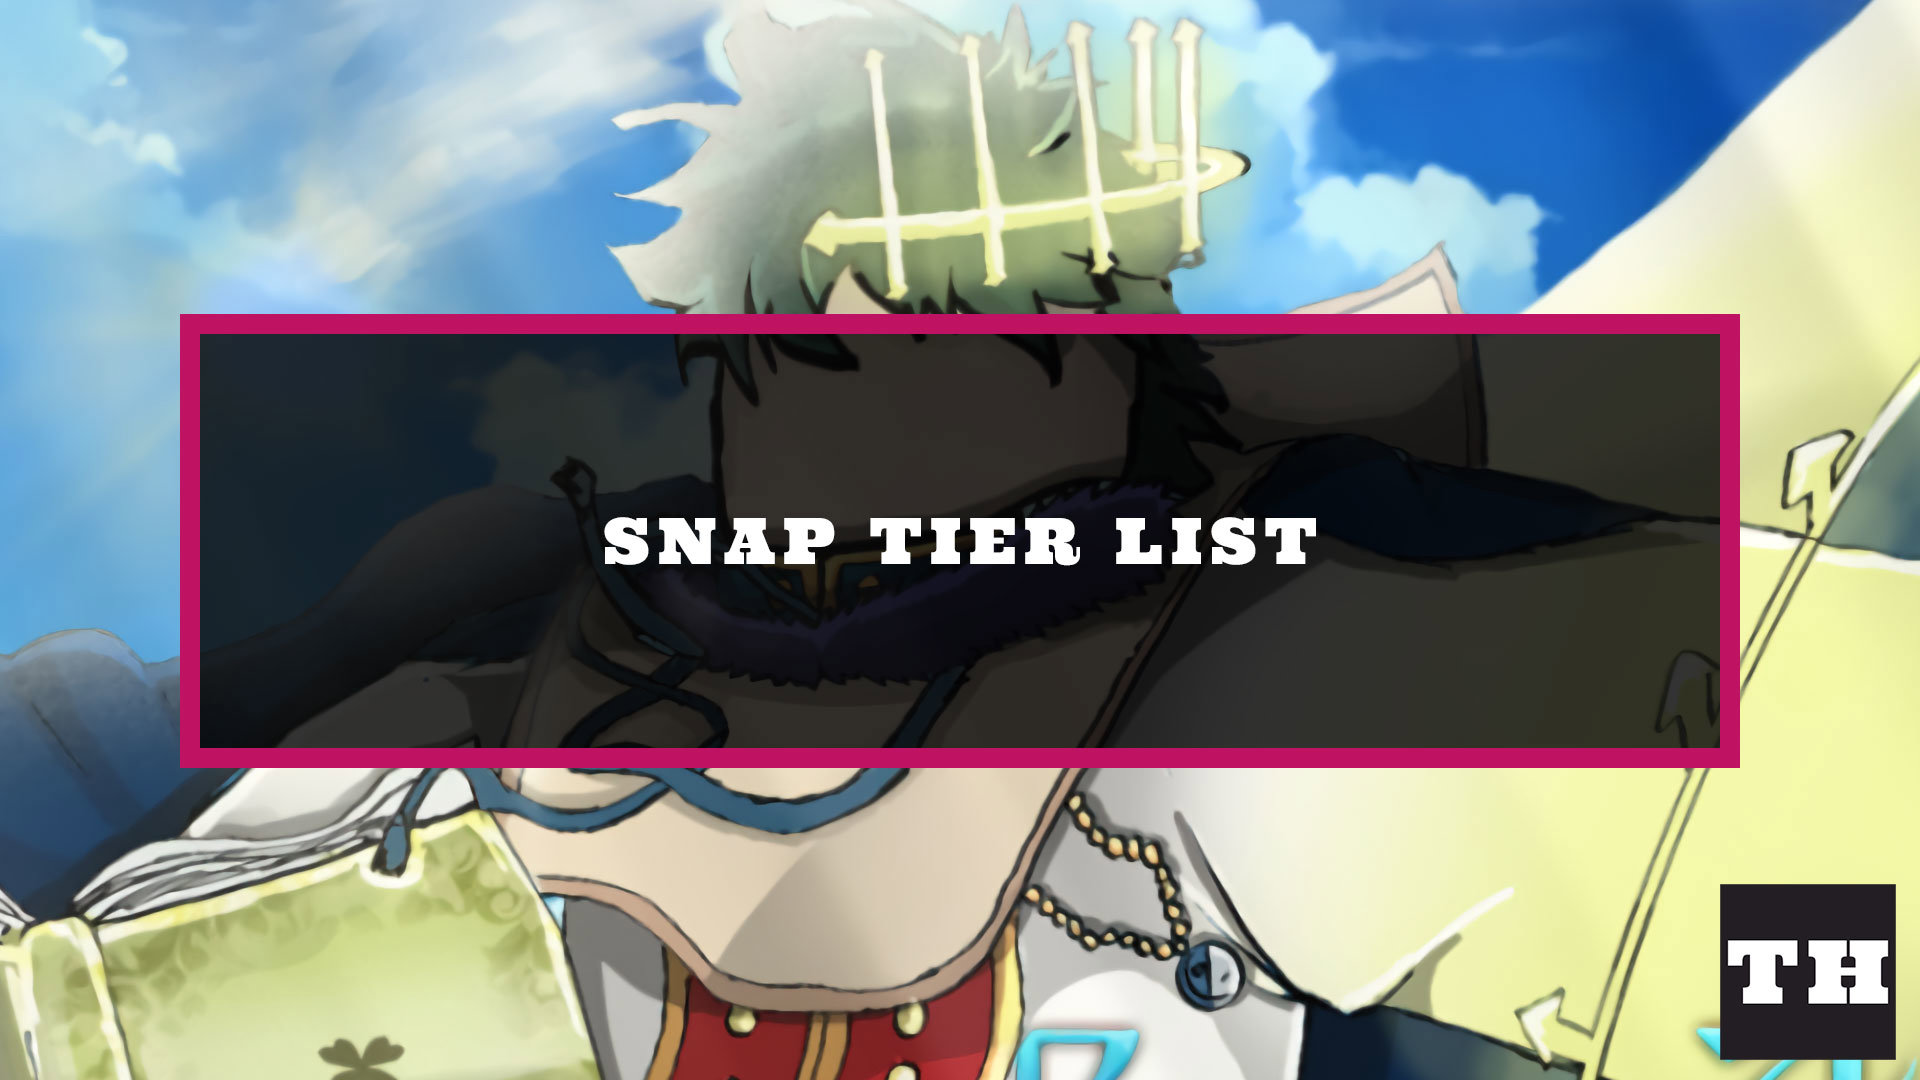 Era Of Althea Tier List: All Snaps Ranked